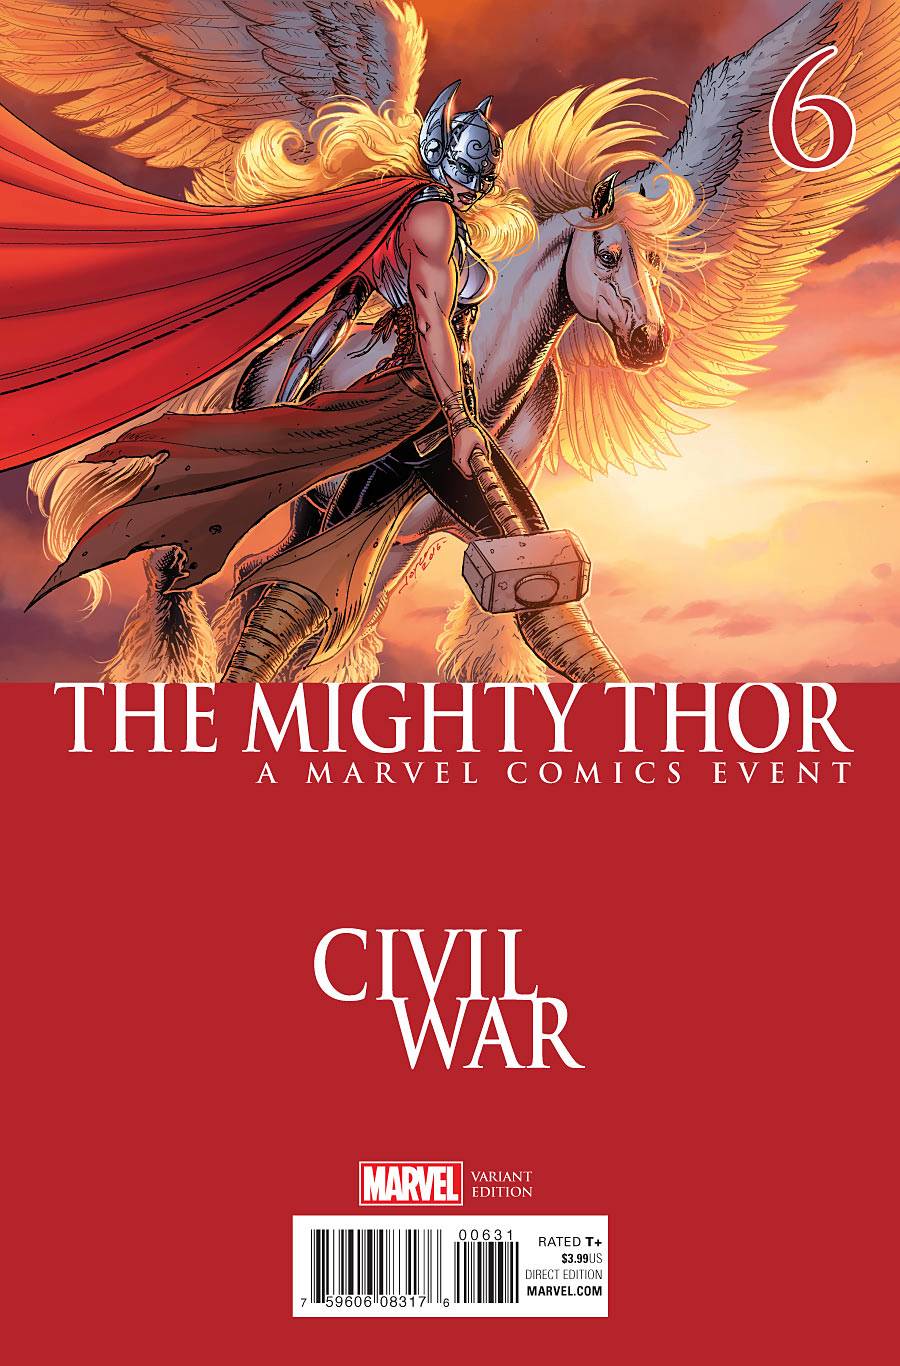 Mighty Thor #6 Civil War Variant (2015)